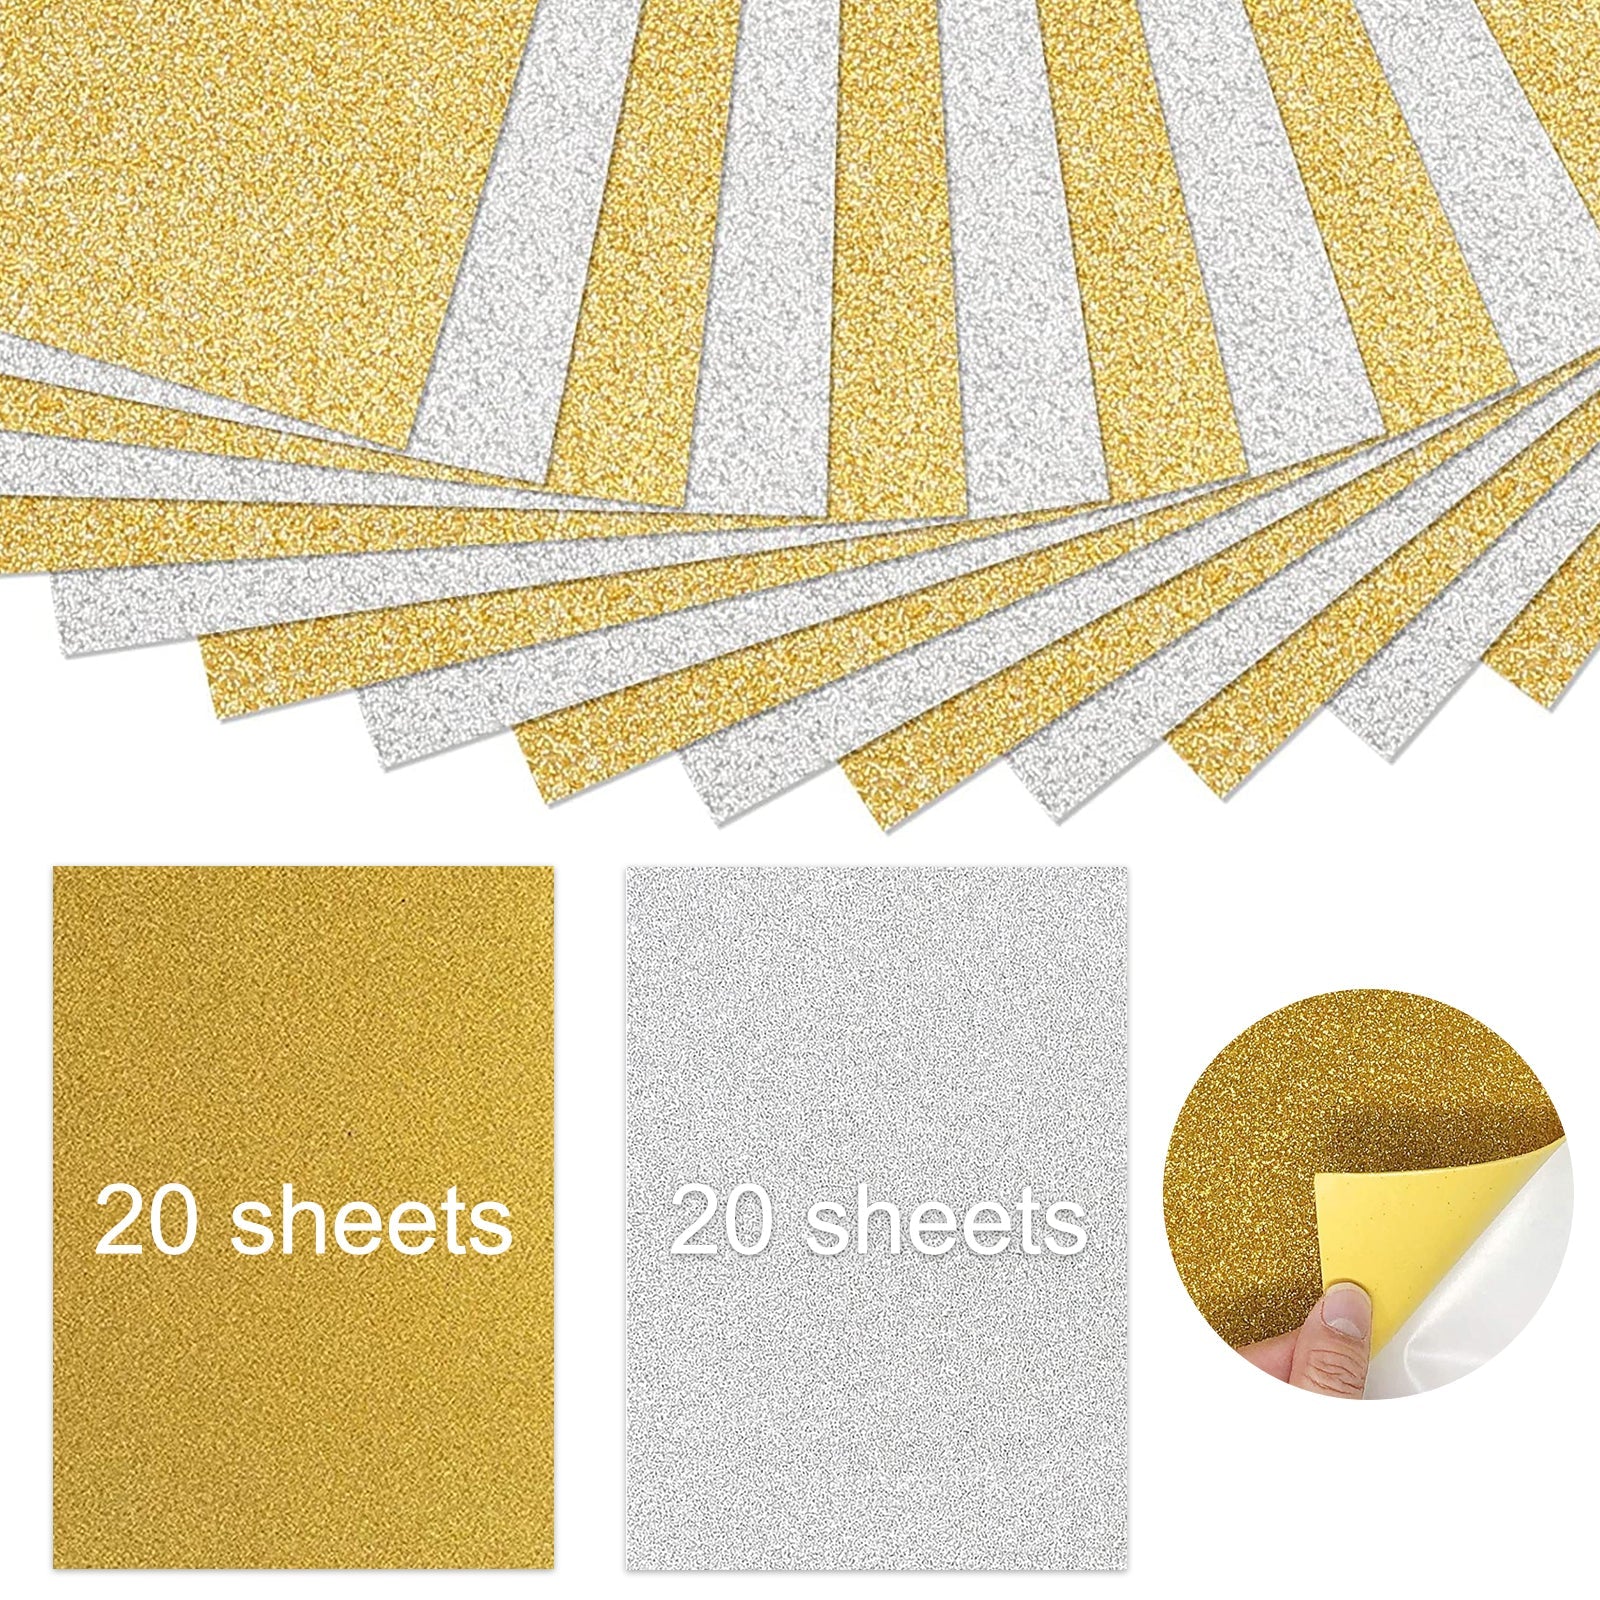 A4 Gold and Silver Self-Adhesive Glitter Cardstock Paper for Laser Engraving - 40 Sheets